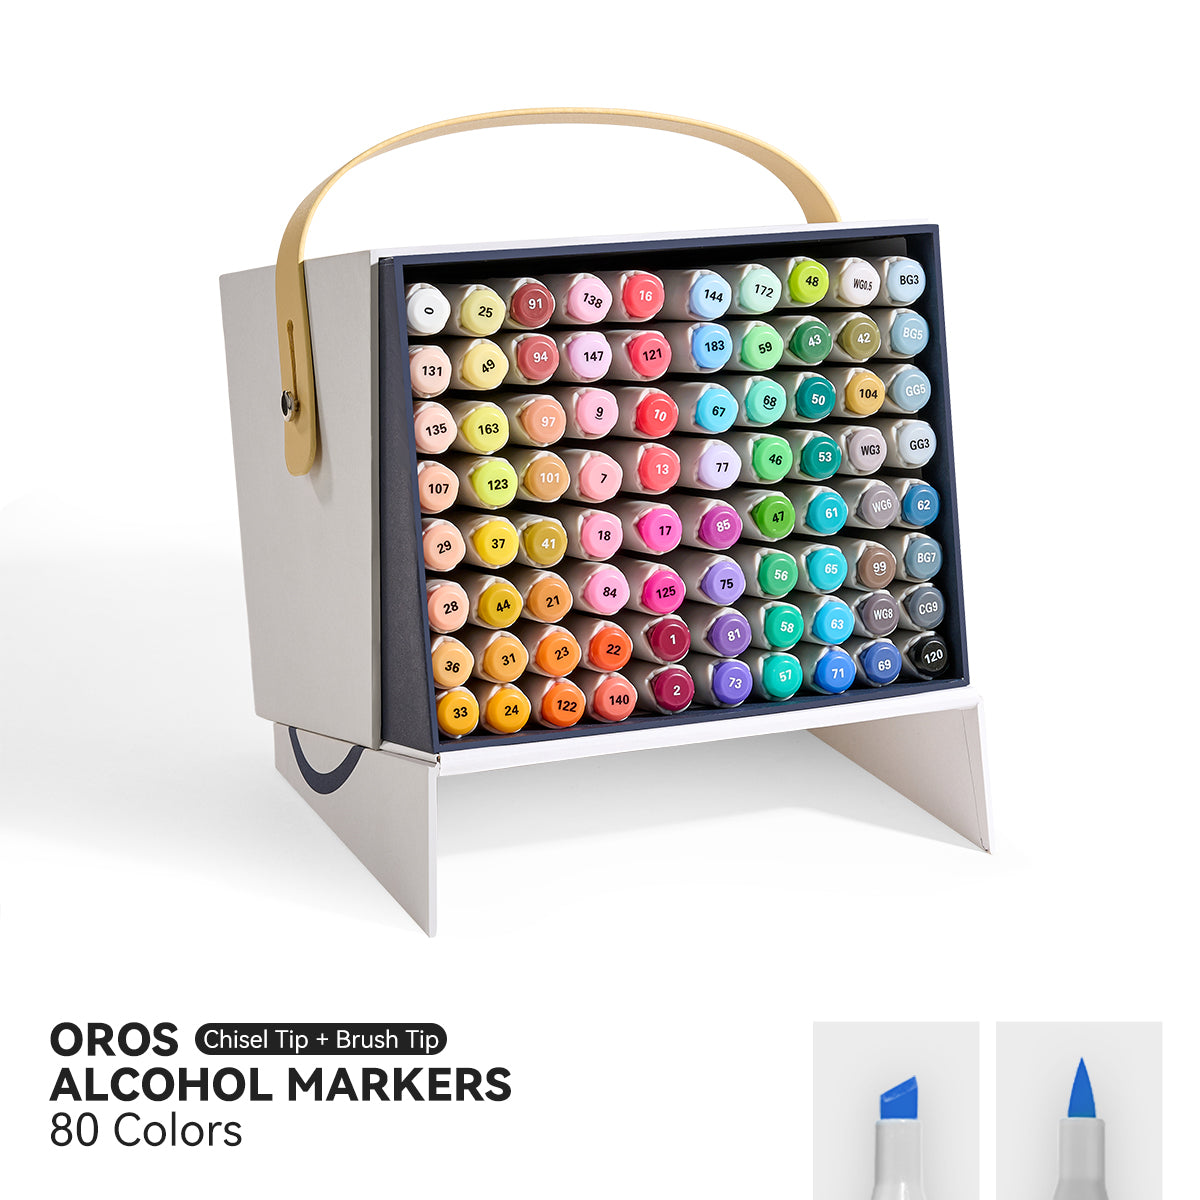 Arrtx OROS 80 Colors Alcohol Markers